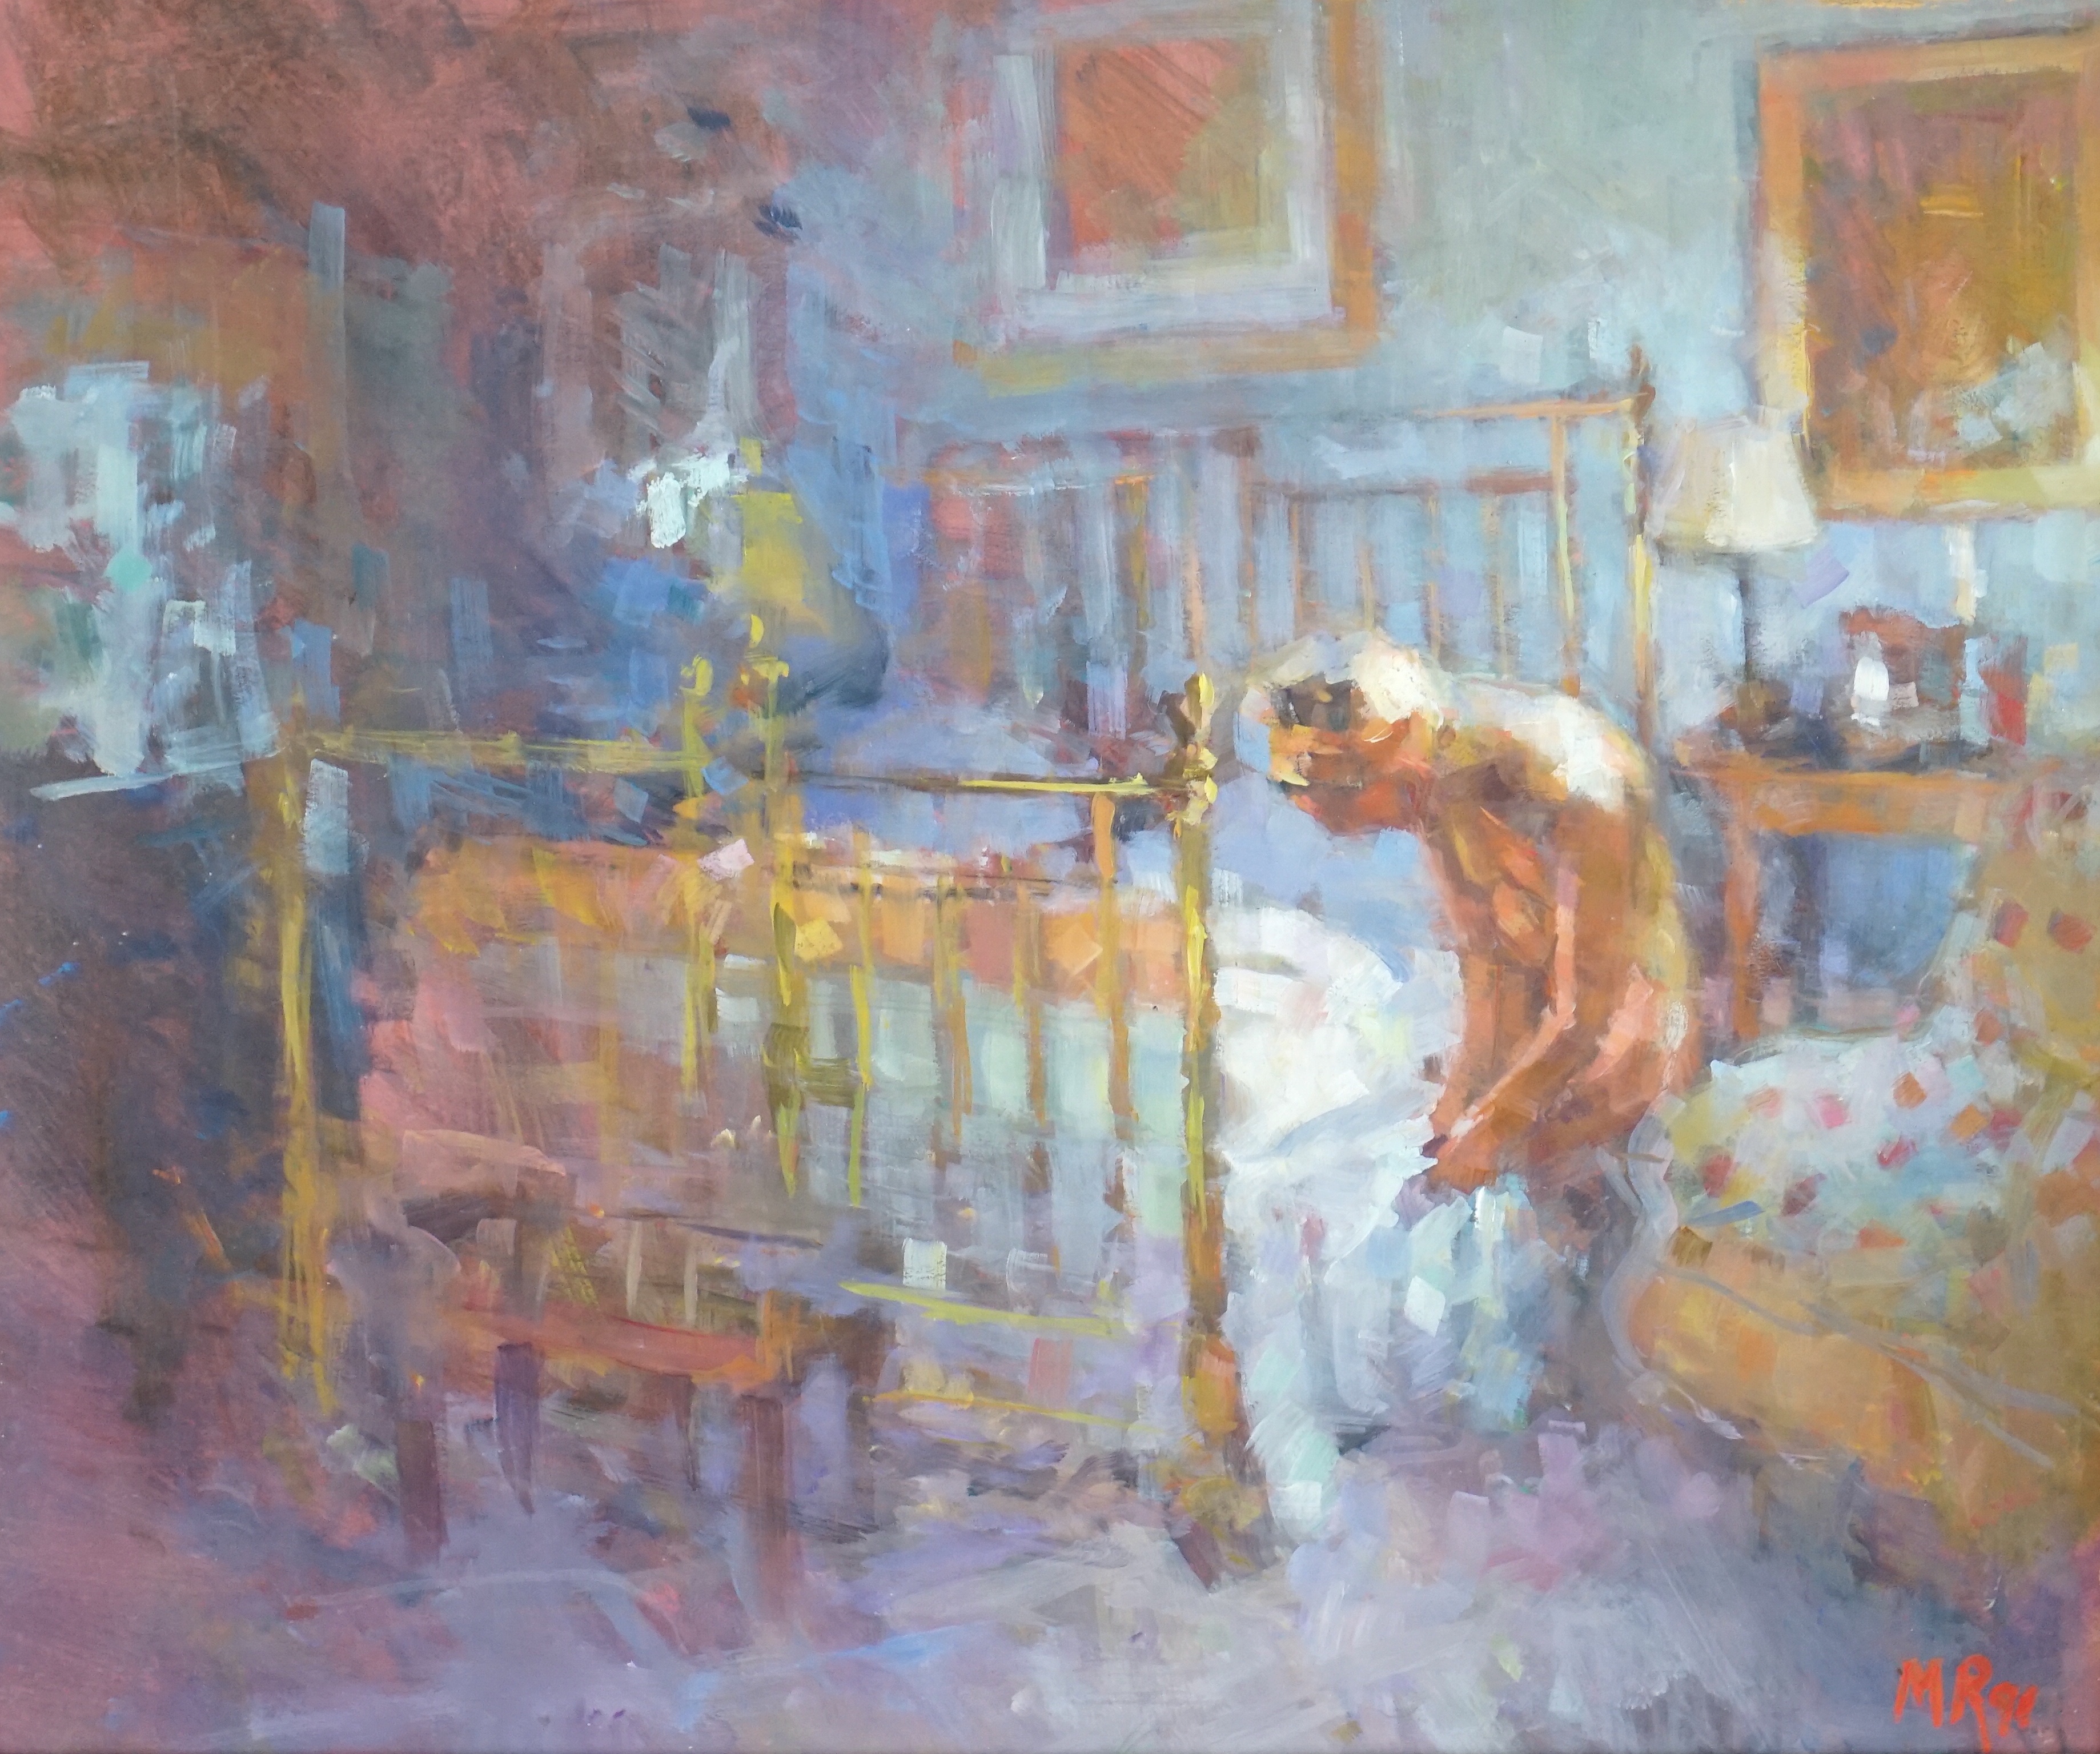 Mark Rowbotham (1959-), oil on board, Bedroom interior with female nude, initialled and dated '91, 25 x 30cm